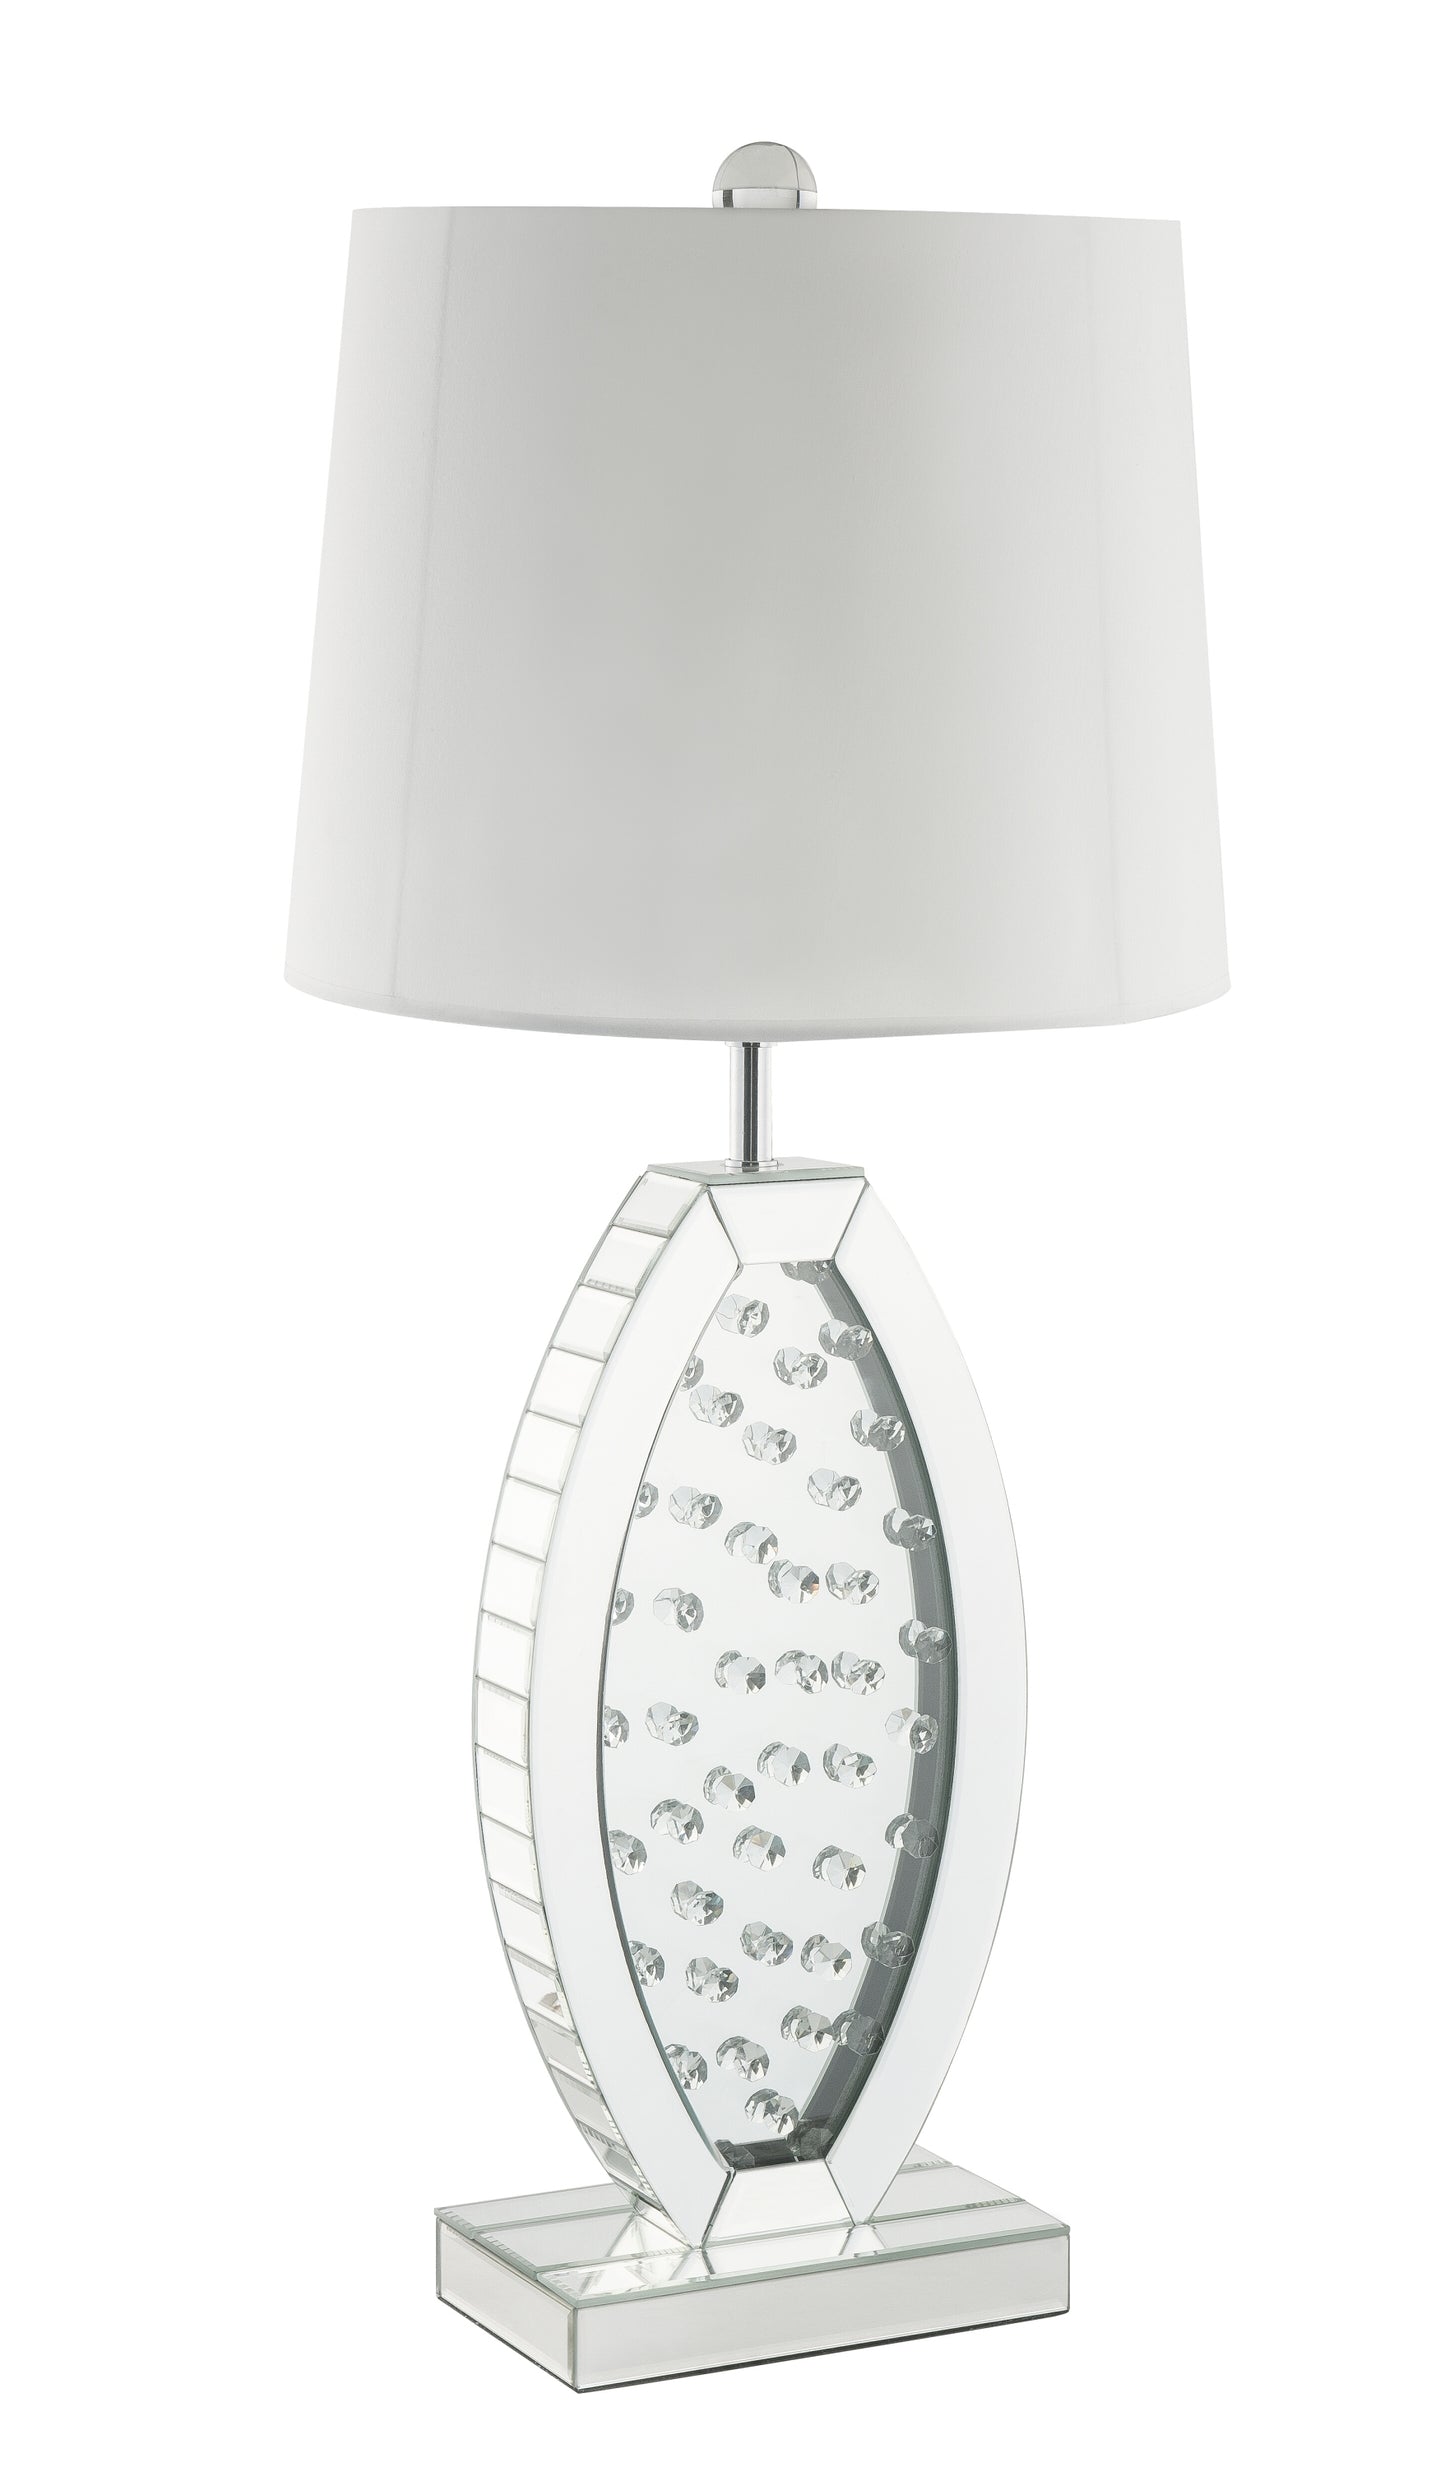 ACME Nysa Table Lamp in Mirrored & Faux Crystals 40215